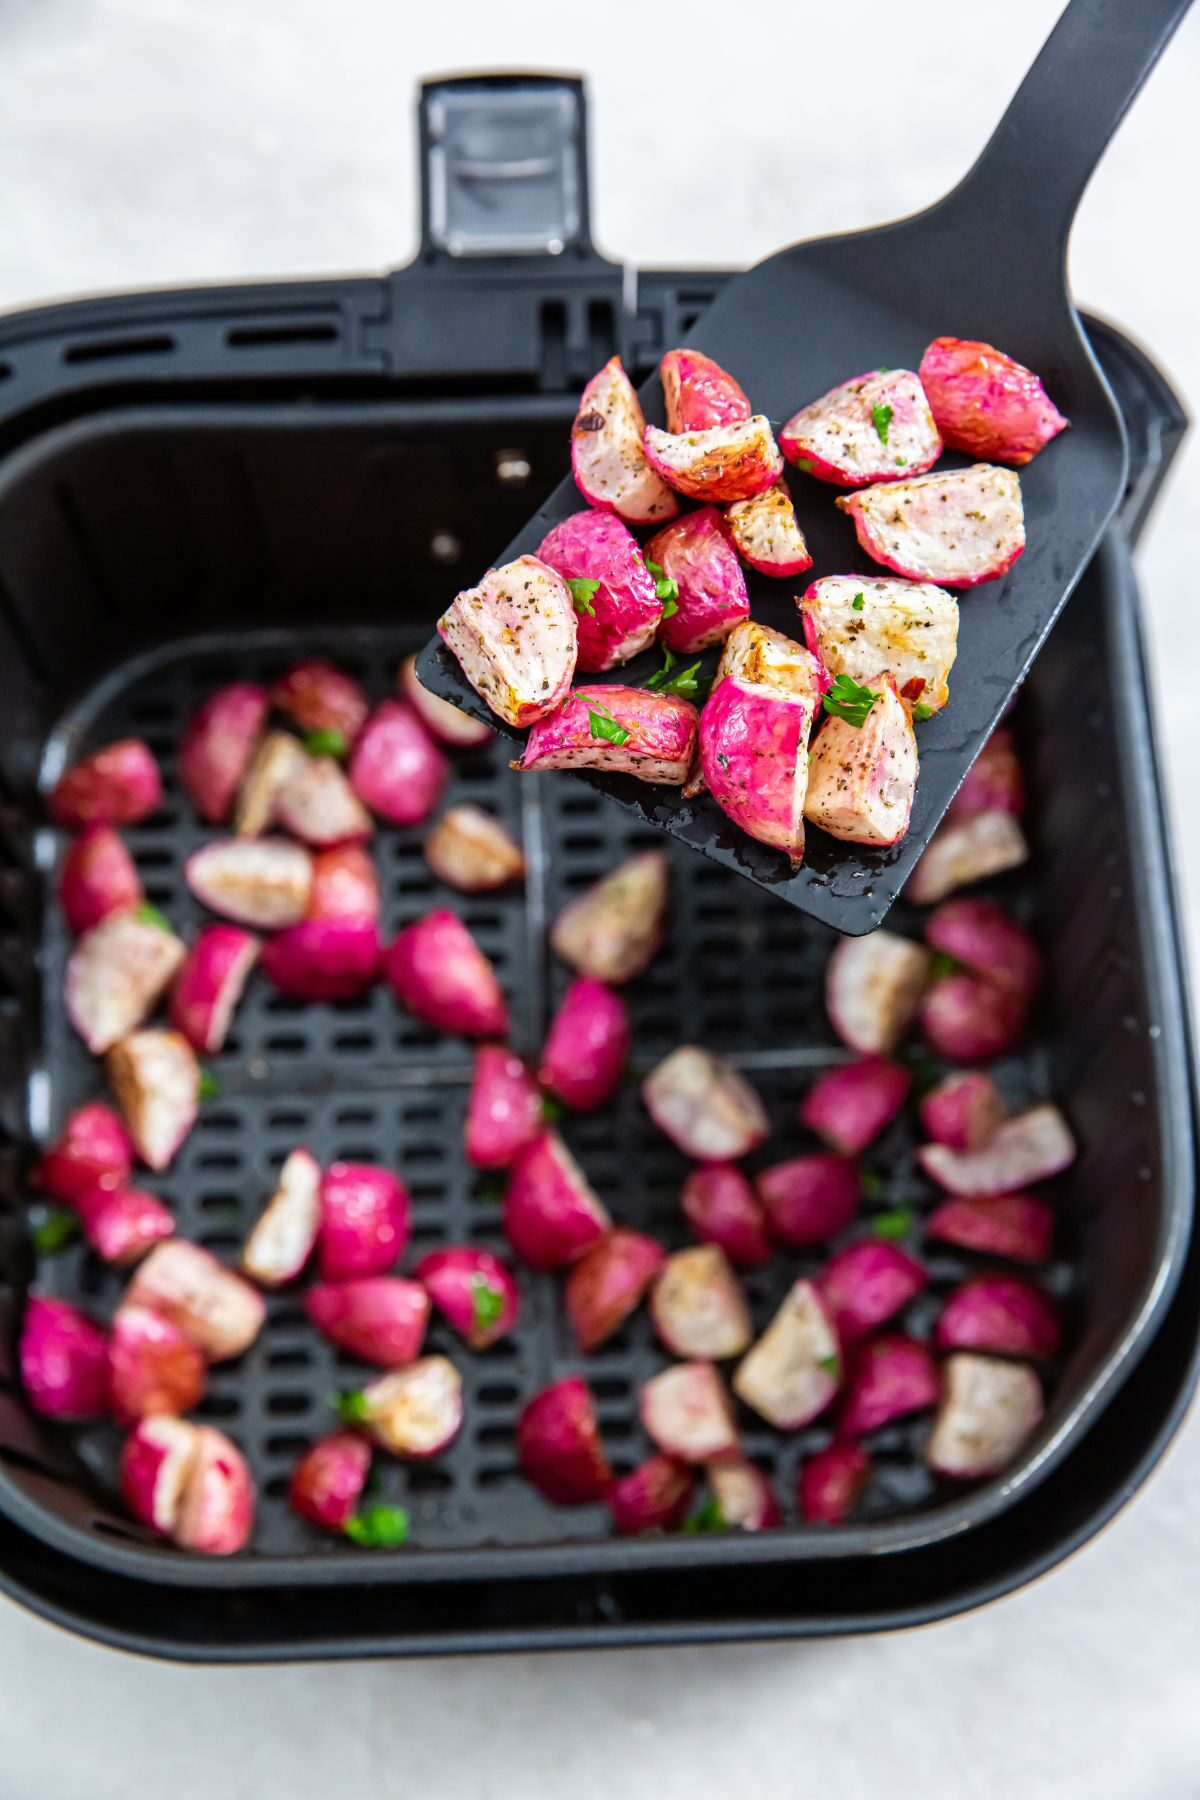 Air fryer radishes in the air fryer basket with a spatula lifting up some